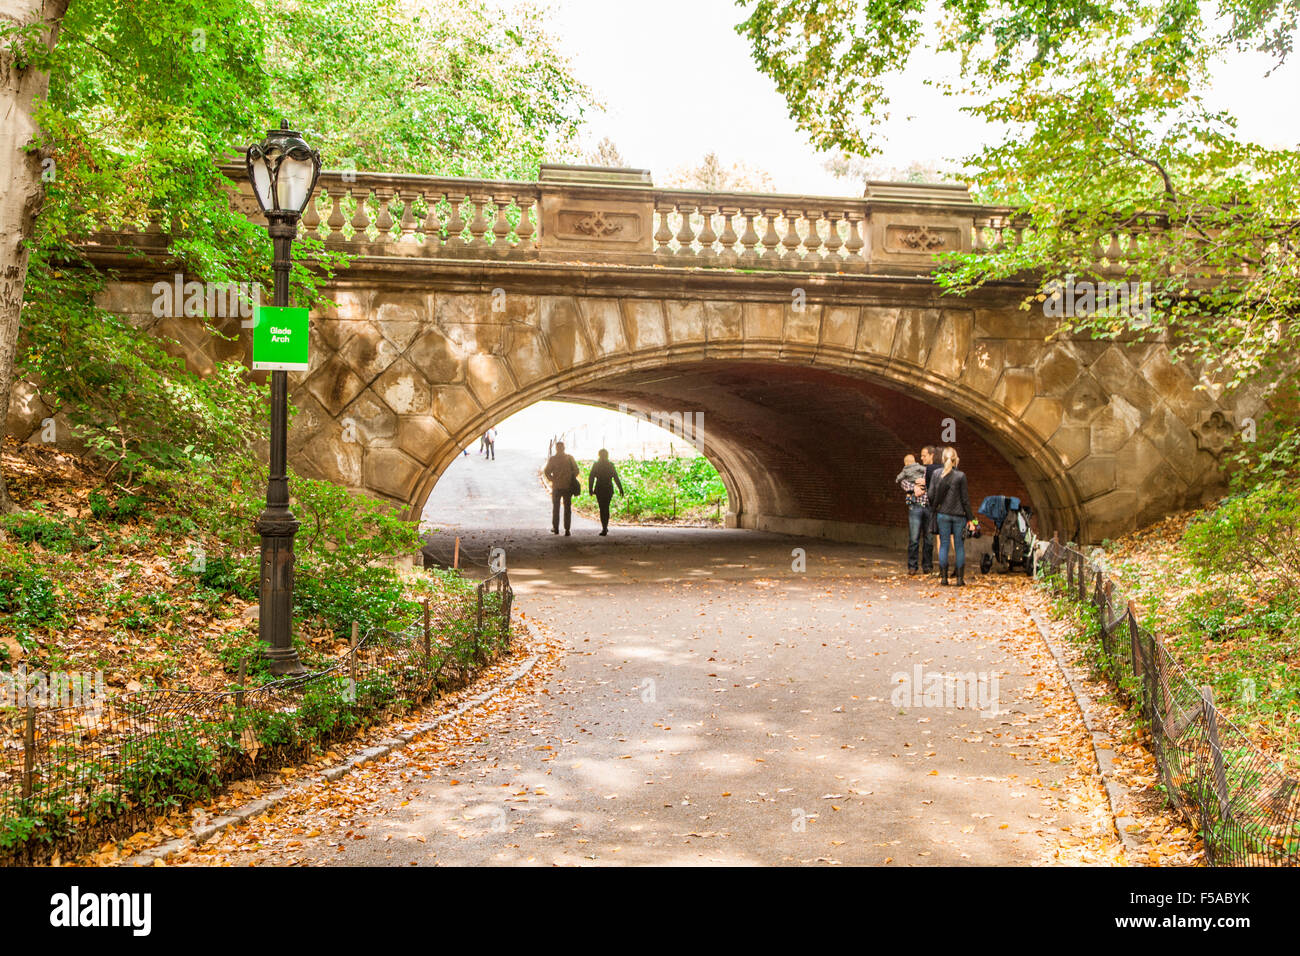 Glade Arch, Central park, new York City, united States of America. Stock Photo